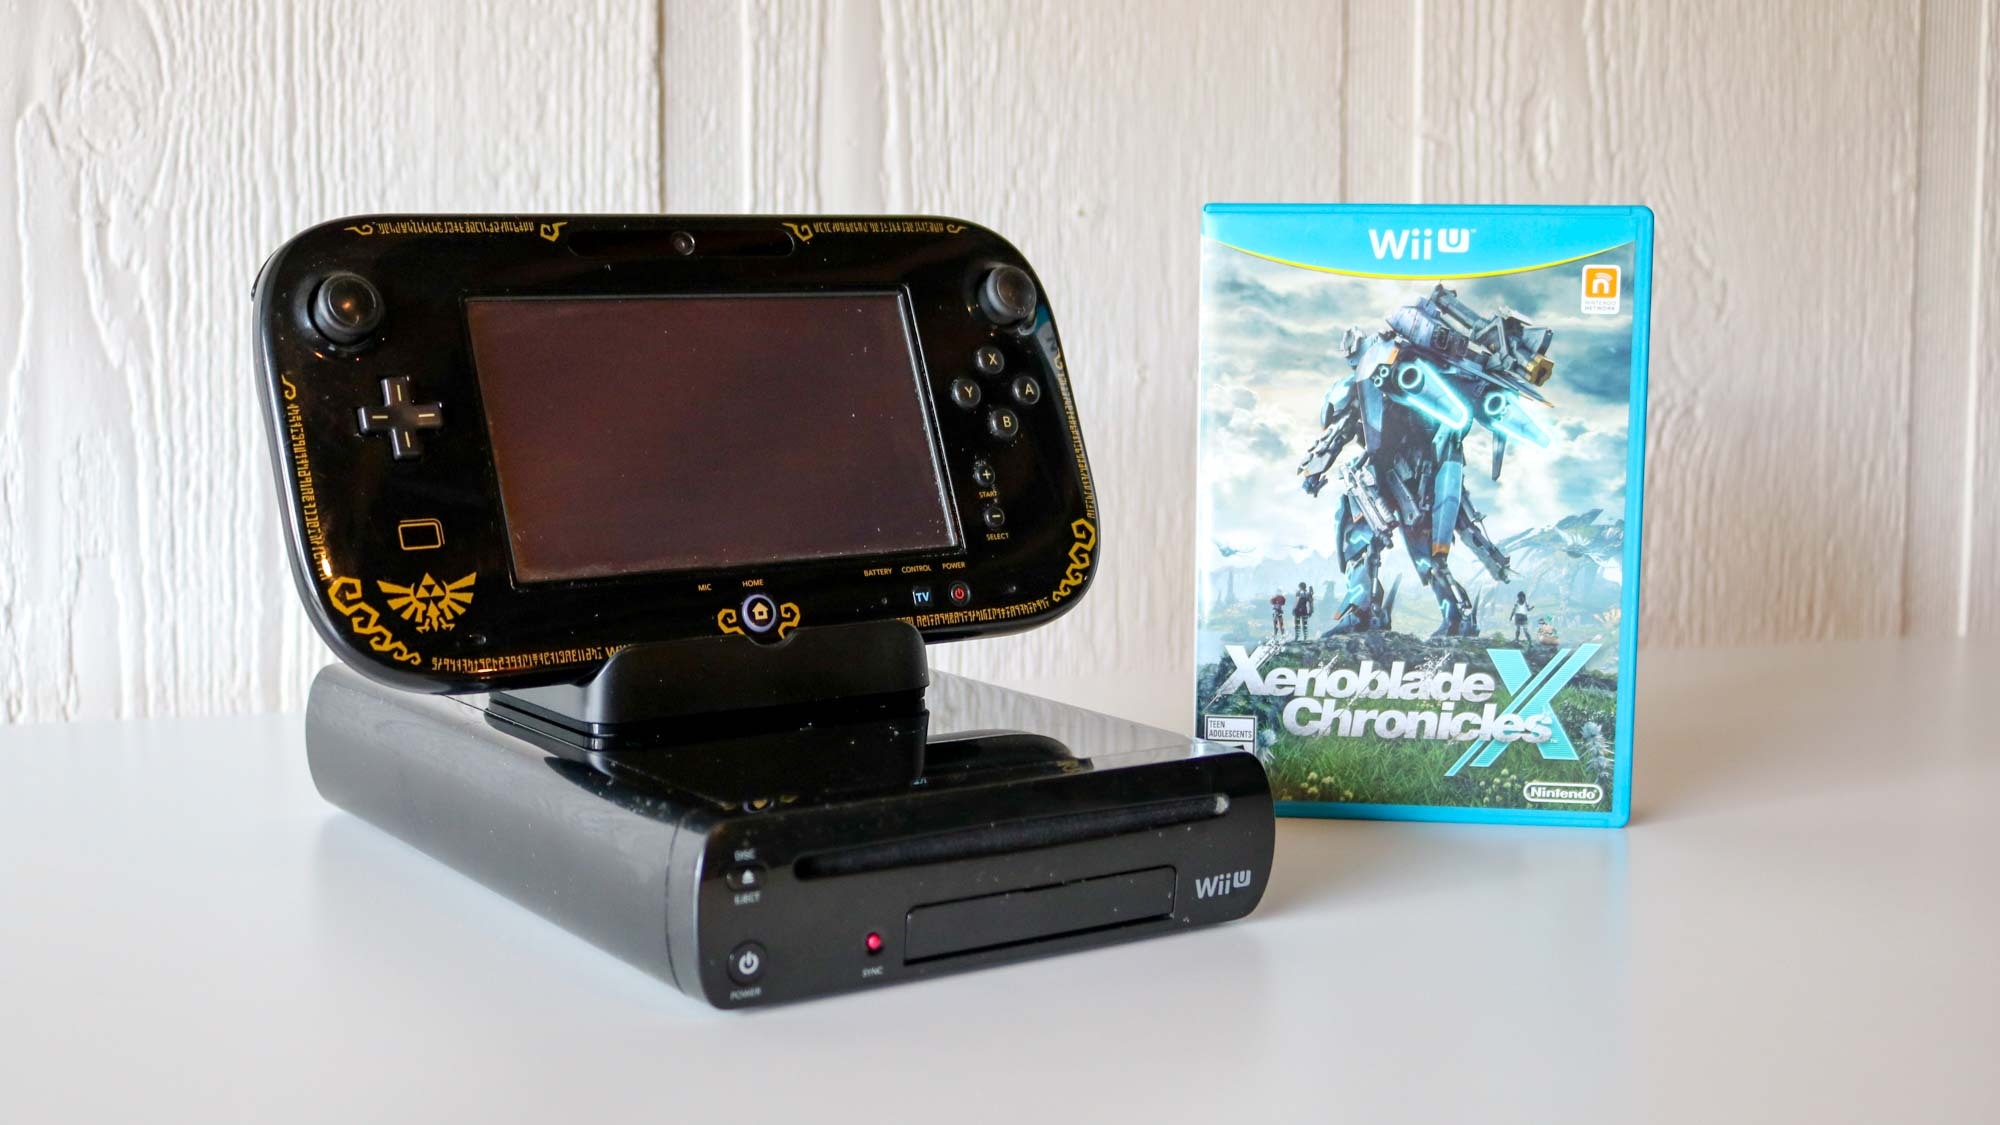 A copy of Xenoblade Chronicles X next to a Wii U console